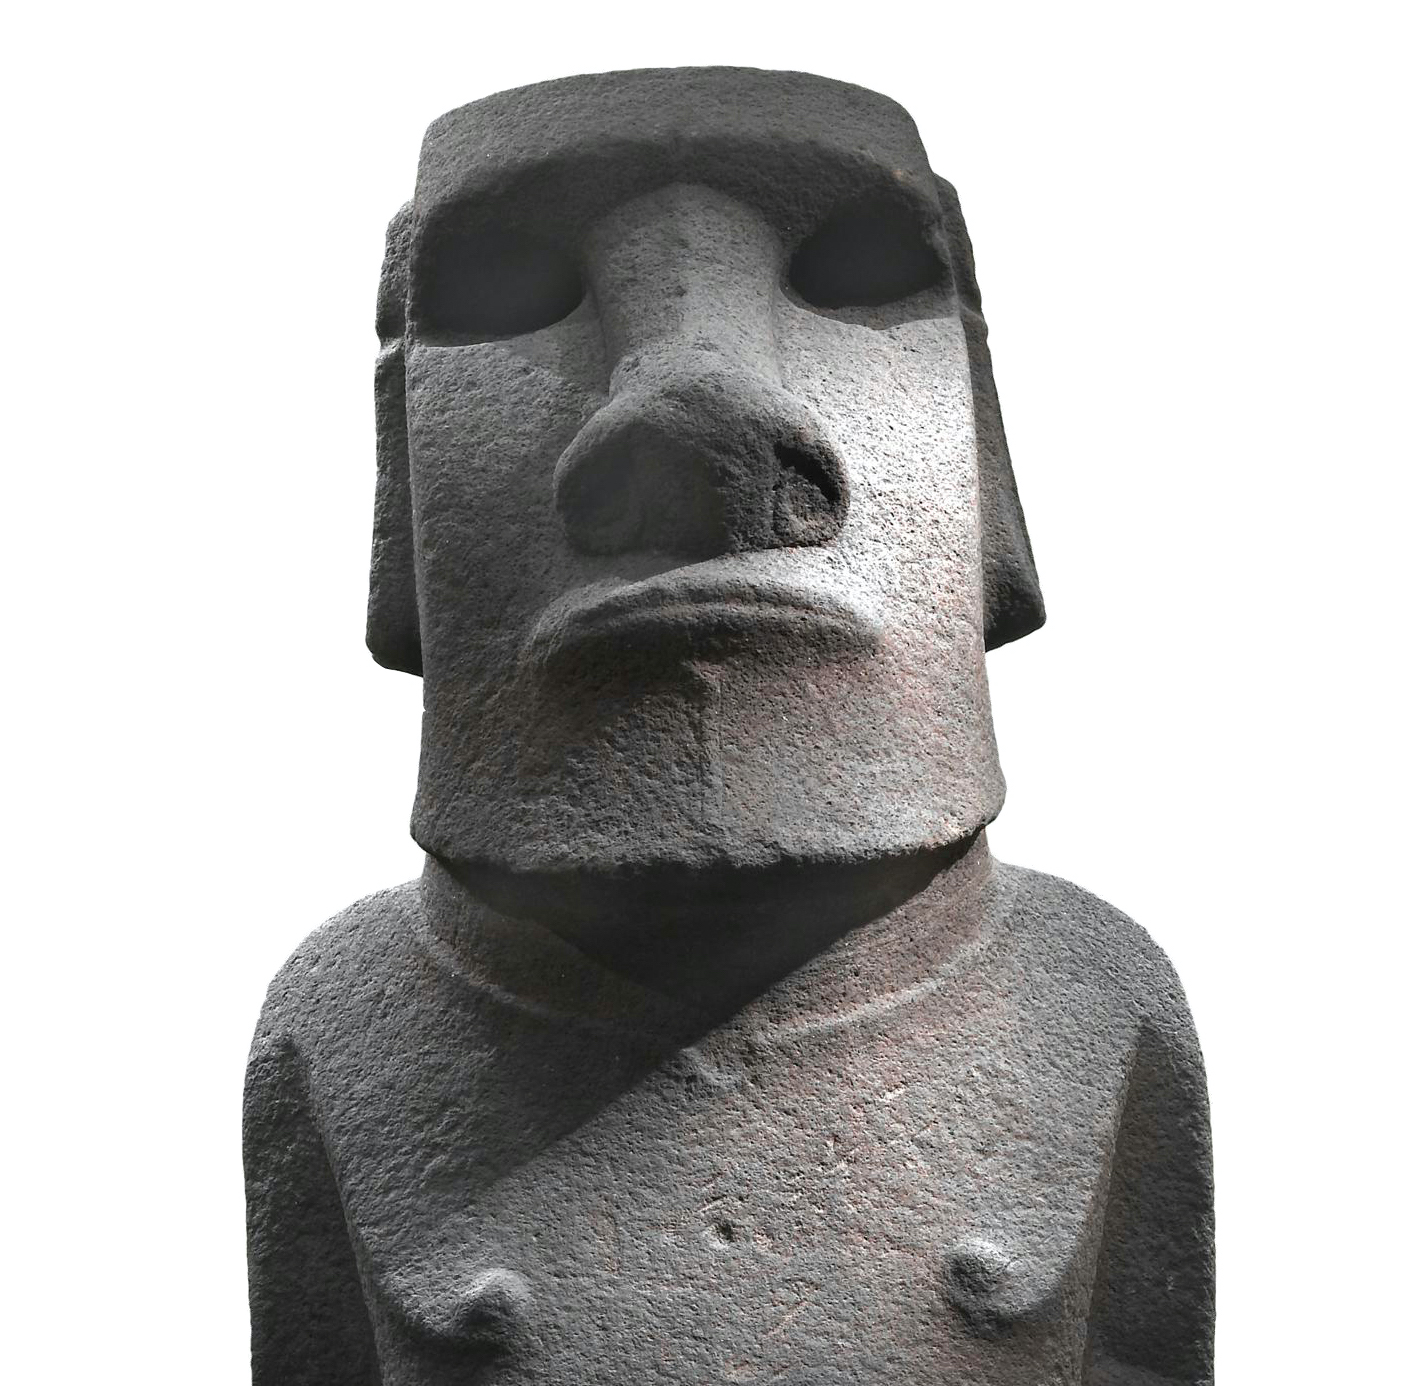 Bust (detail), Hoa Hakananai'a ('lost or stolen friend’), Moai (ancestor figure), c. 1200 C.E., 242 x 96 x 47 cm, basalt (missing paint, coral eye sockets, and stone eyes), likely made in Rano Kao, Rapa Nui (Easter Island), found in the ceremonial center Orongo (© The Trustees of the British Museum)